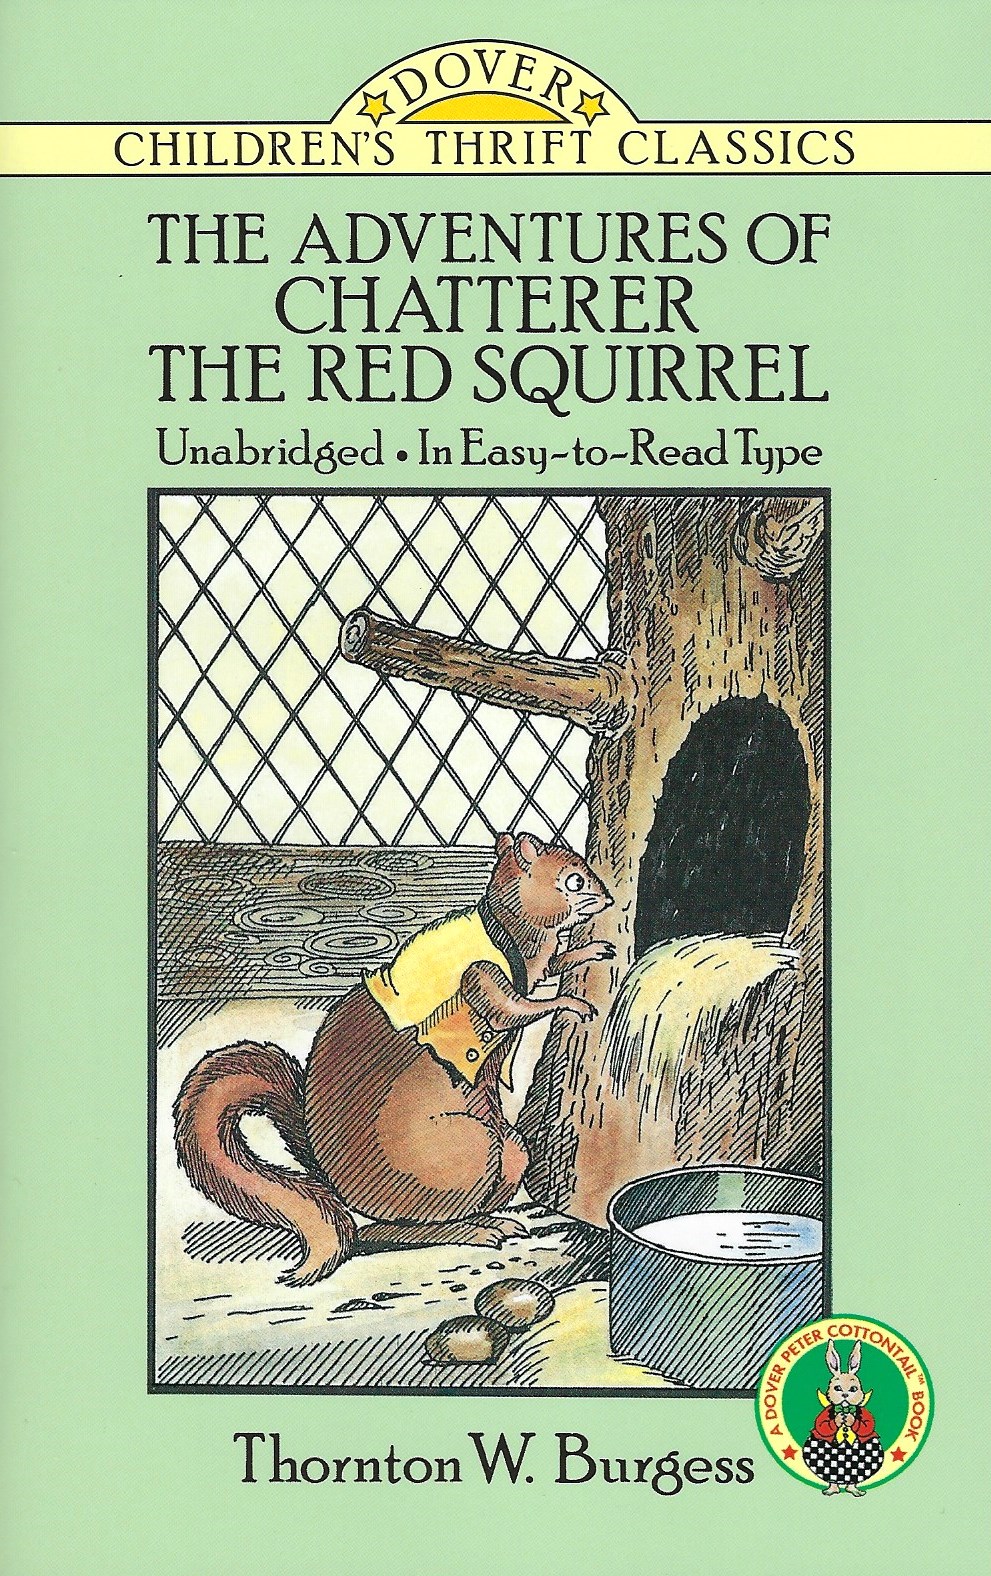 CHATTERER THE RED SQUIRREL Thornton W. Burgess